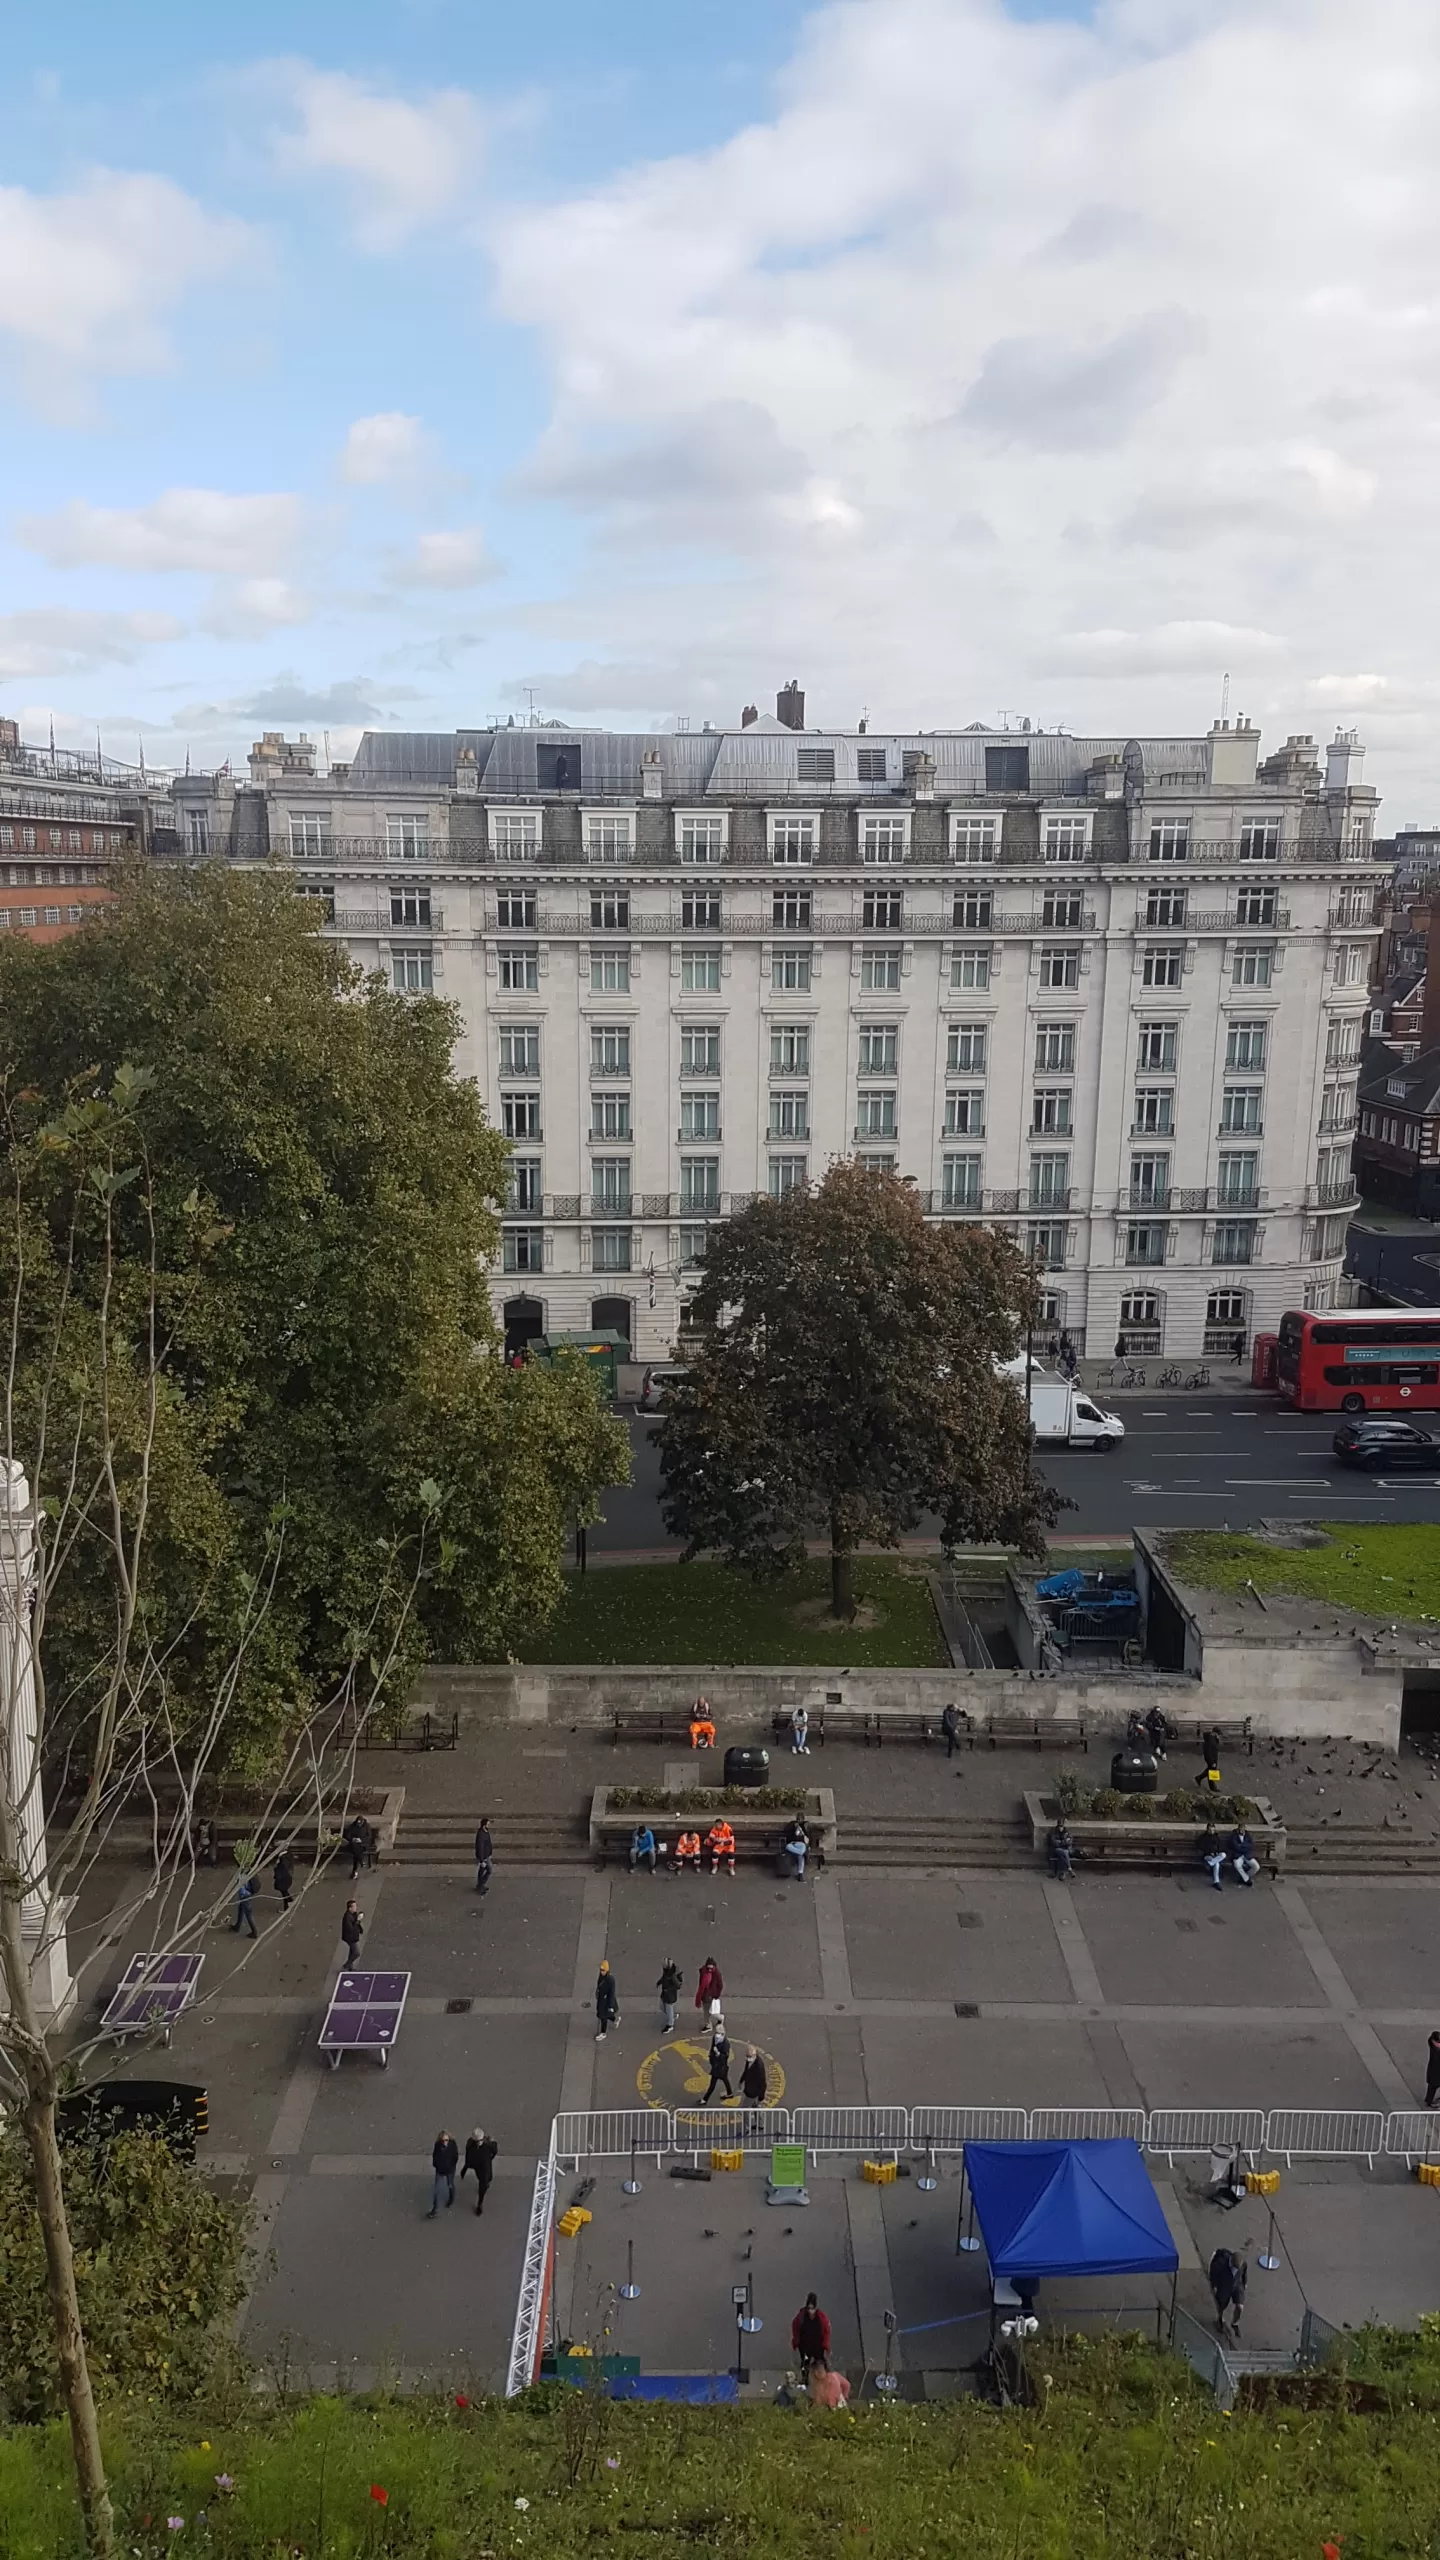 A view from Marble Arch Mound, London